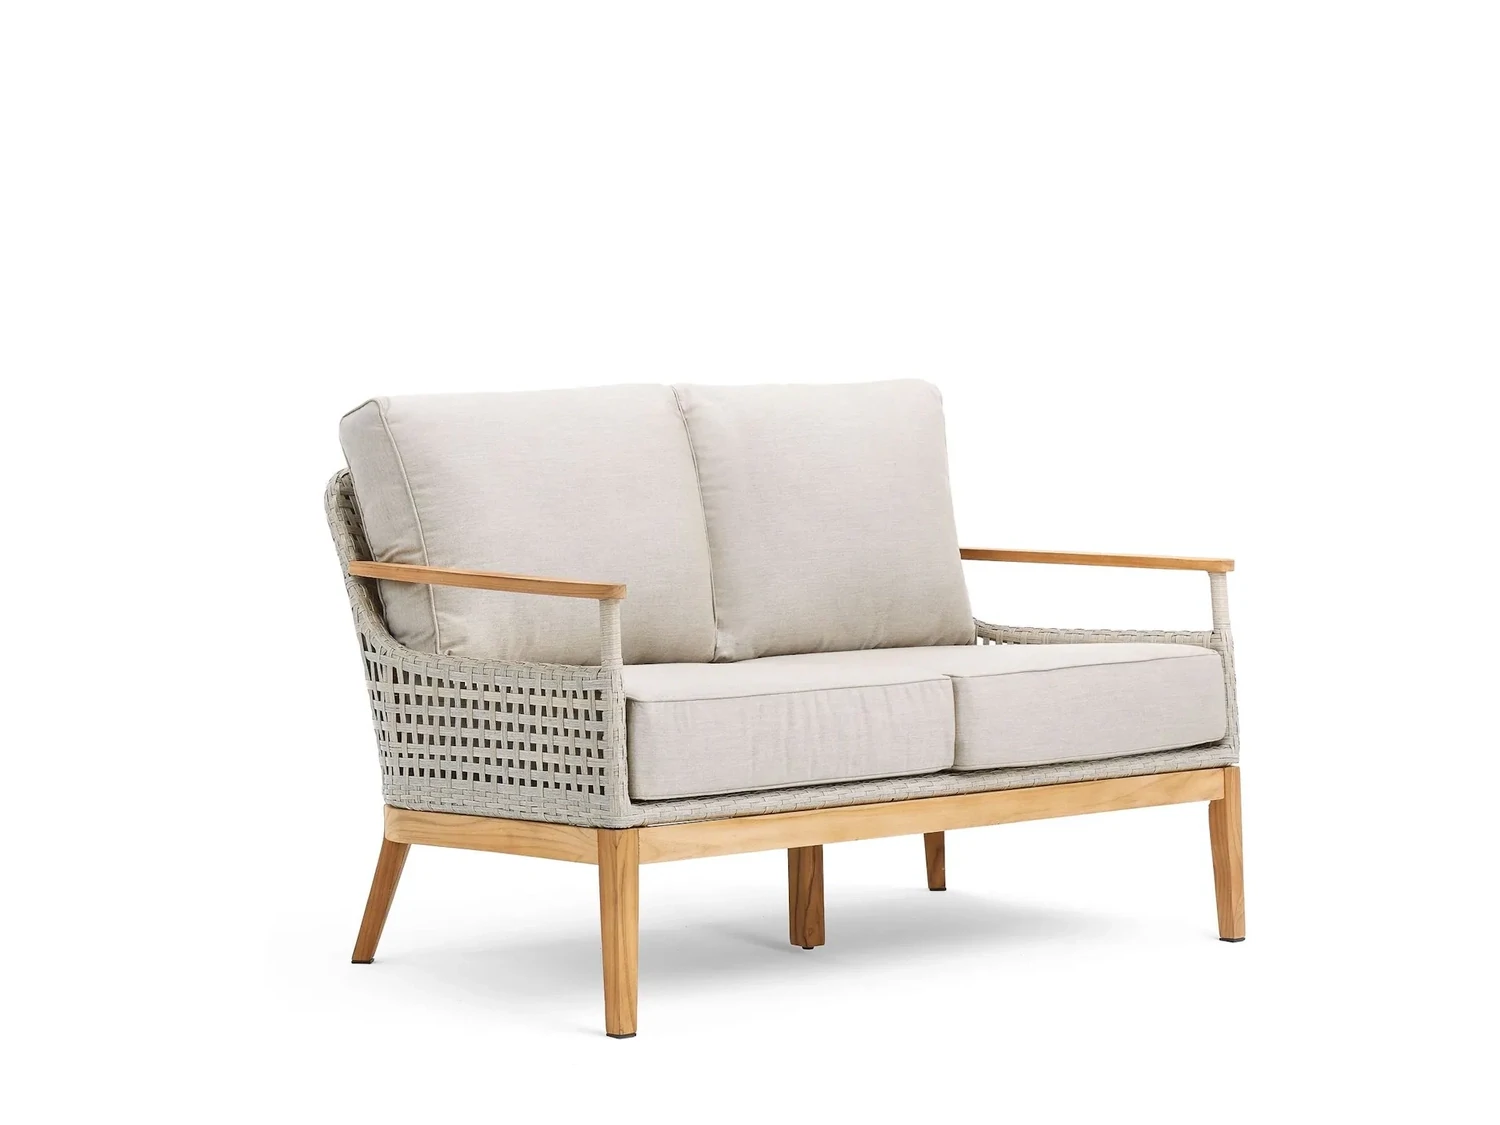 August Teak and Weave Love Seat